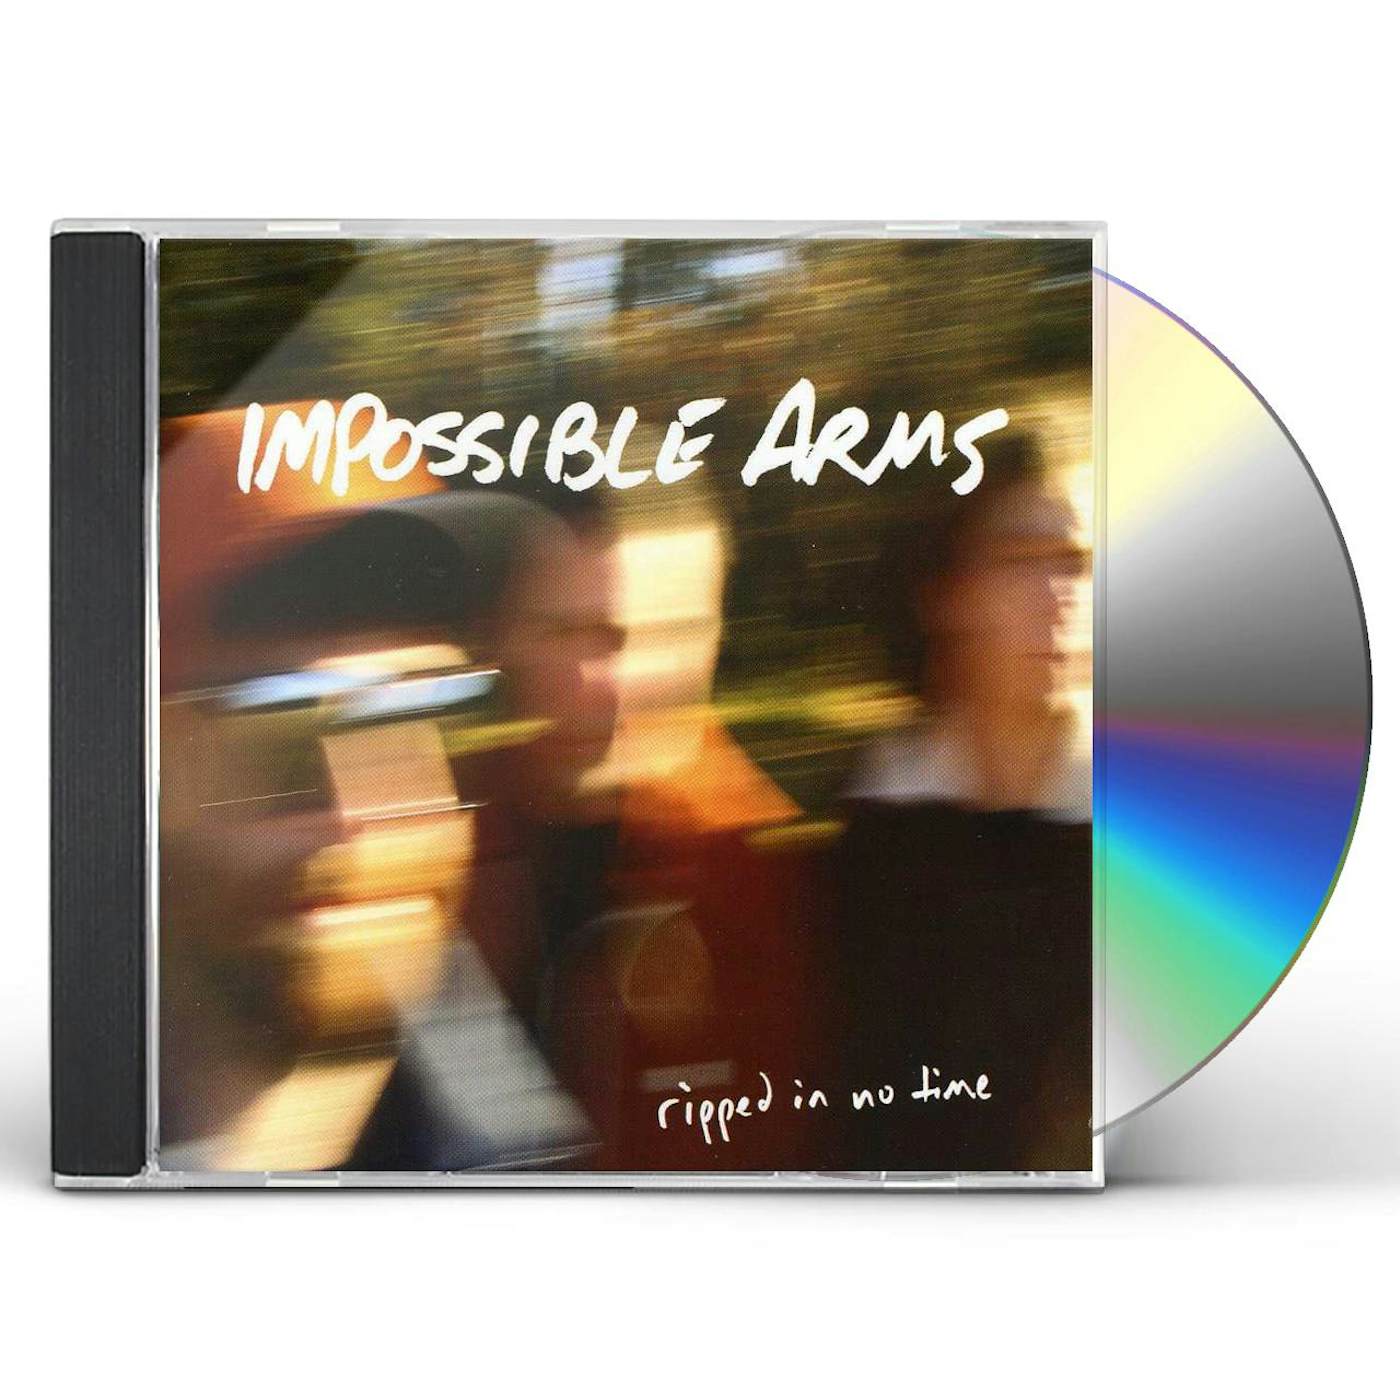 Impossible Arms RIPPED IN NO TIME CD